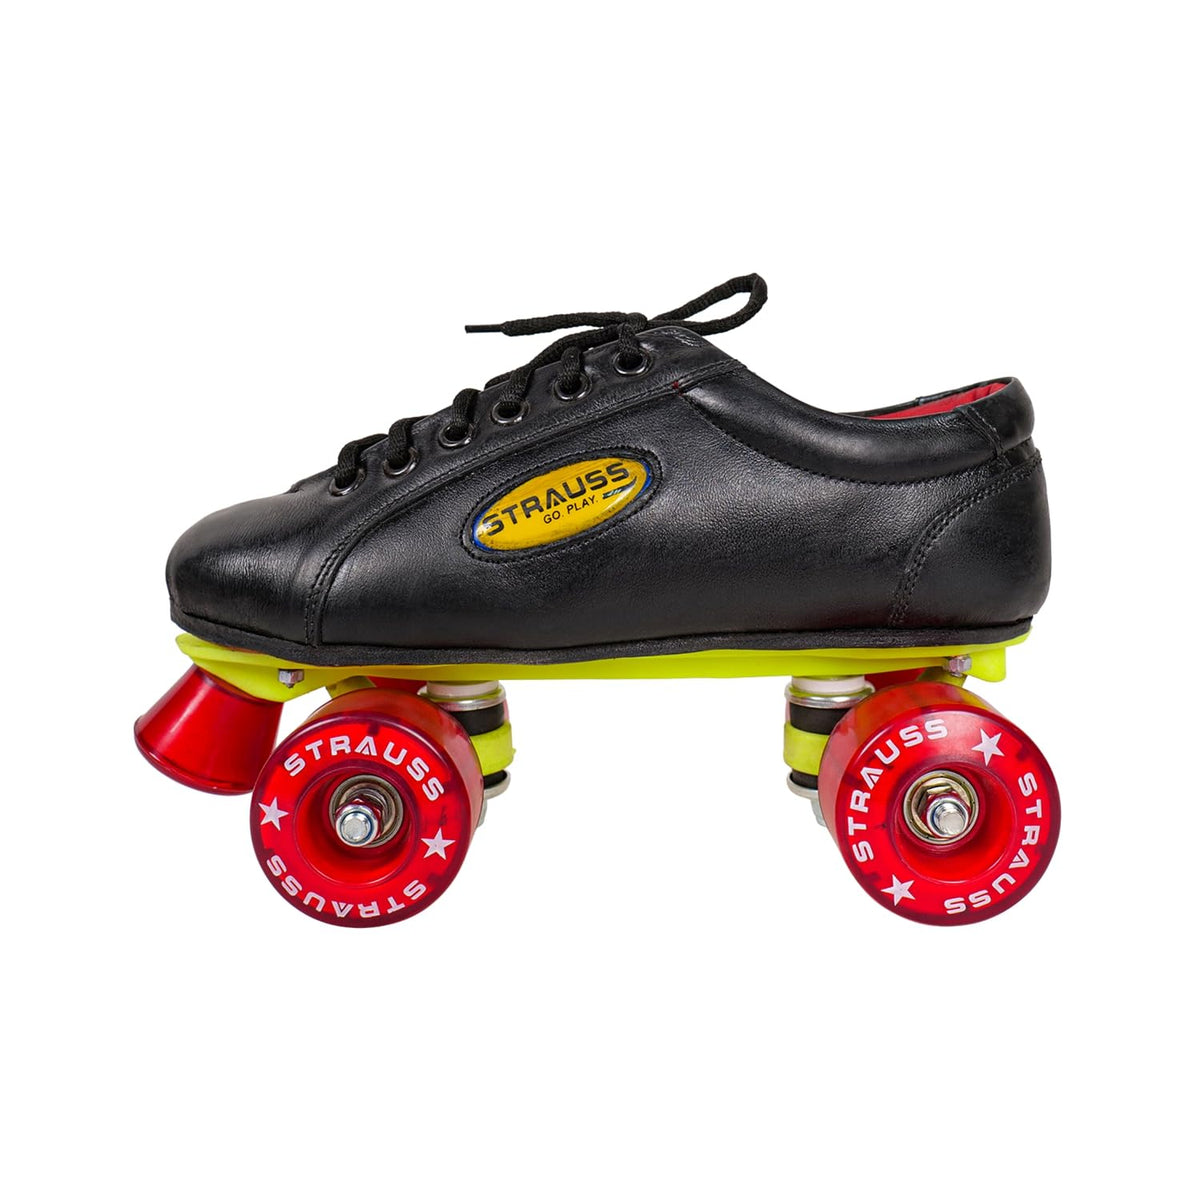 STRAUSS Gripper Skating Shoes | Fixed Body Roller Skates | Shoe Skate with PVC Wheel |Ideal for Boys, Girls and Kids |Suitable for All Skill Level | Ideal for Kids (5-6 Years), Size-11,(Red/Black)